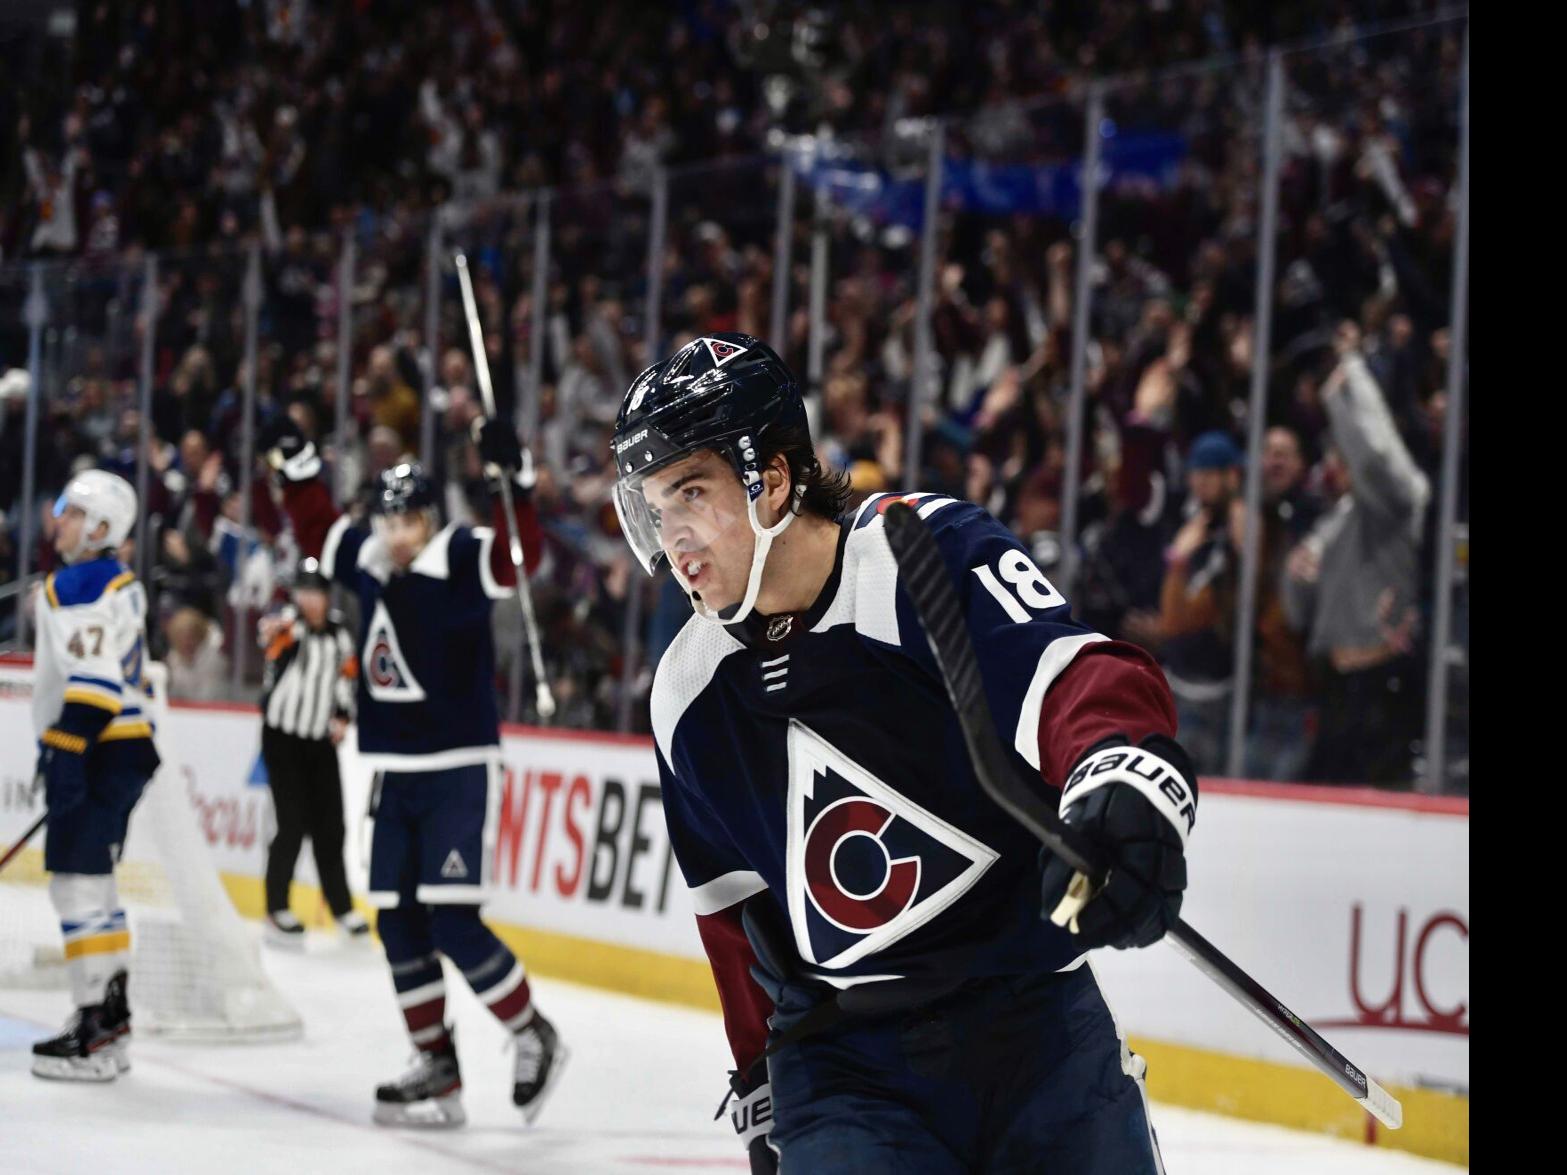 Avs forward Newhook scores opening goal on 22nd birthday, fuels Avs 4-2 win  over Blues, Avalanche